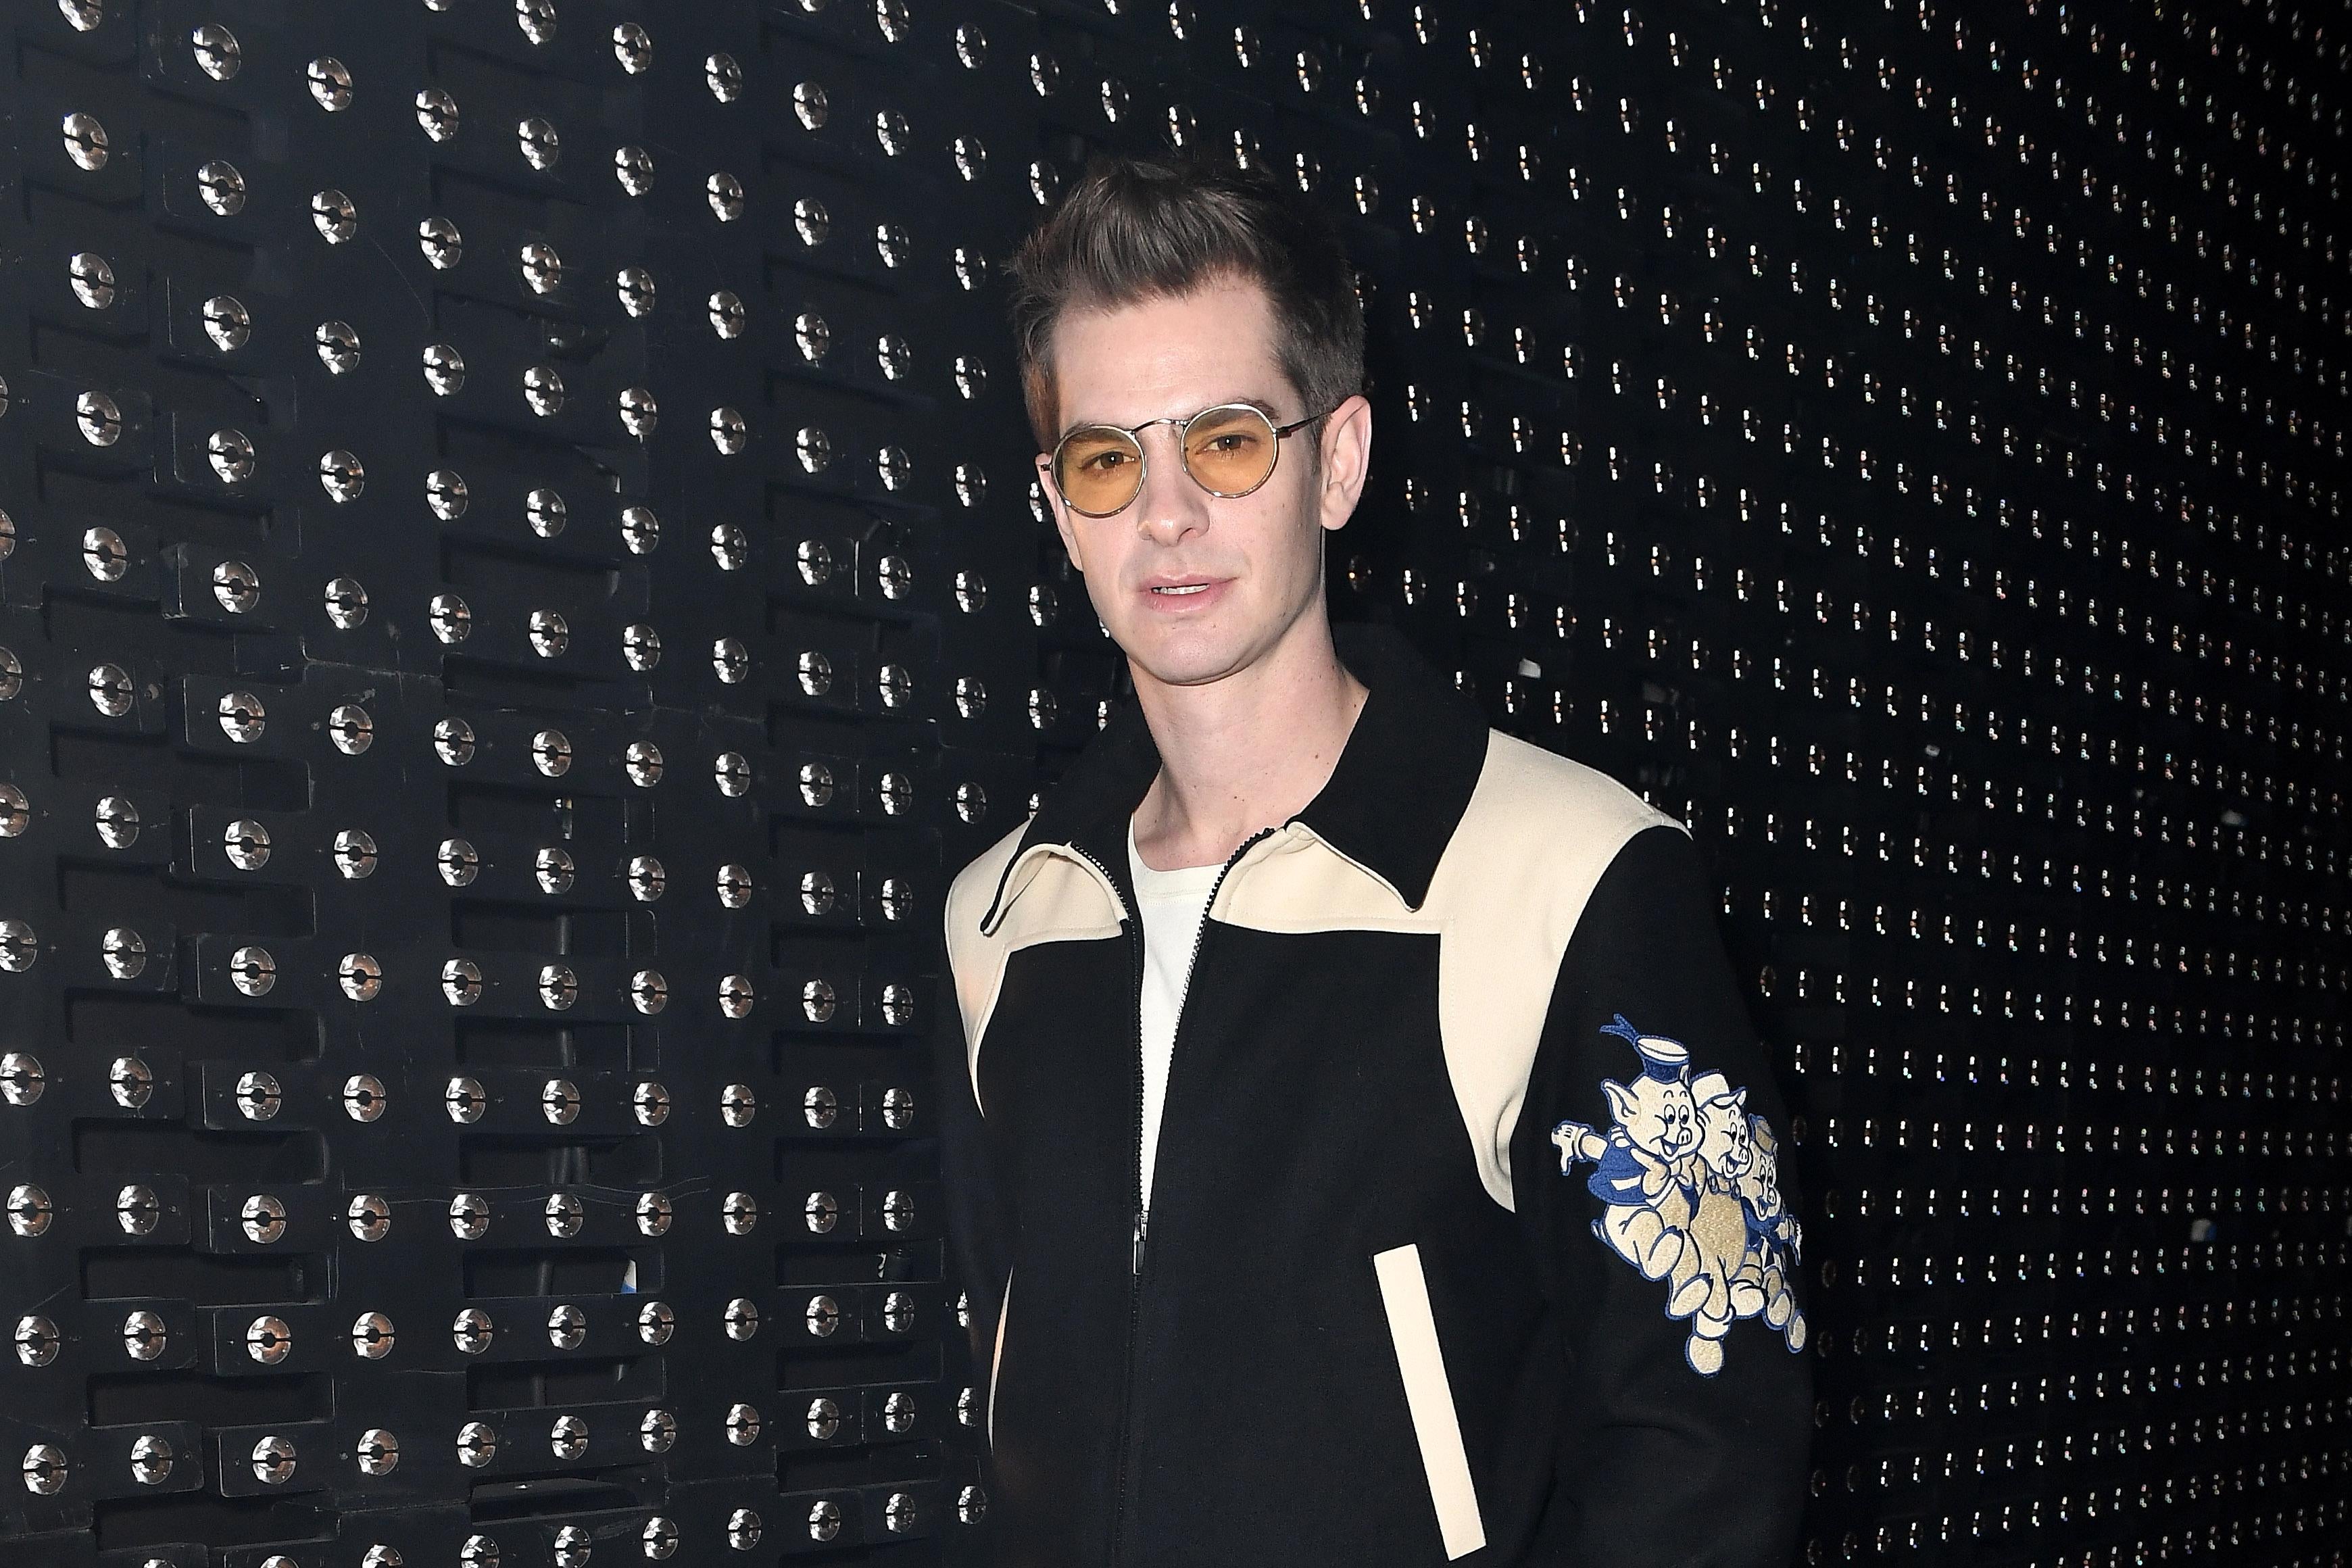 Andrew Garfield, wearing sunglasses and a jacket with cartoon pigs on the sleeve, poses in front of a black studded wall.